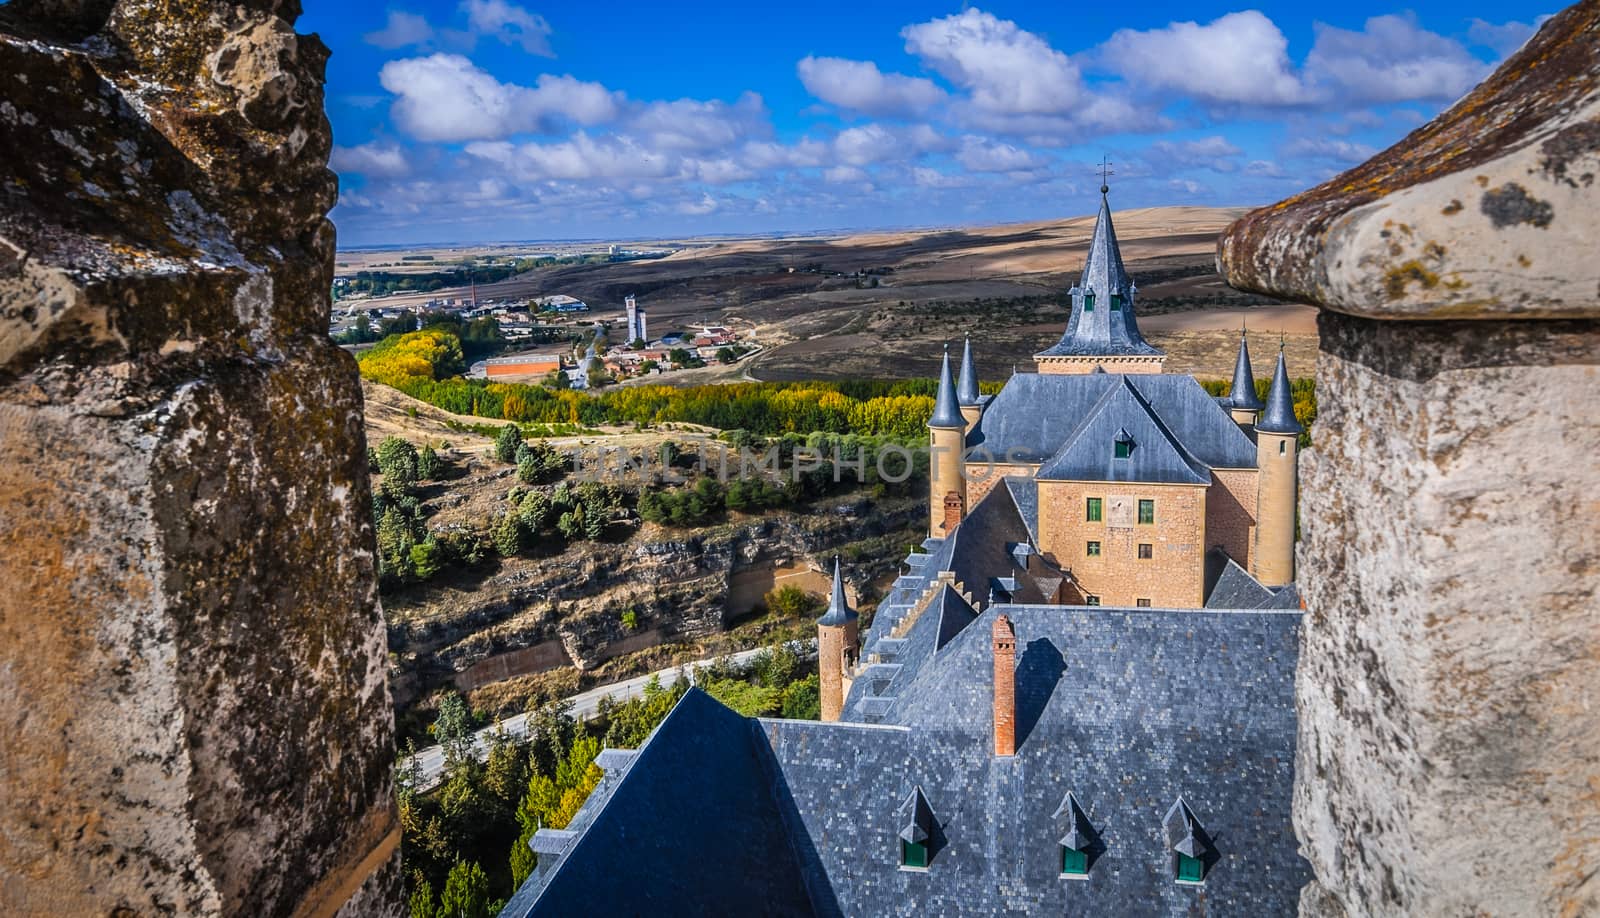 A high up view of the Spanish rural countryside and the castle, from the castle Alcazar.